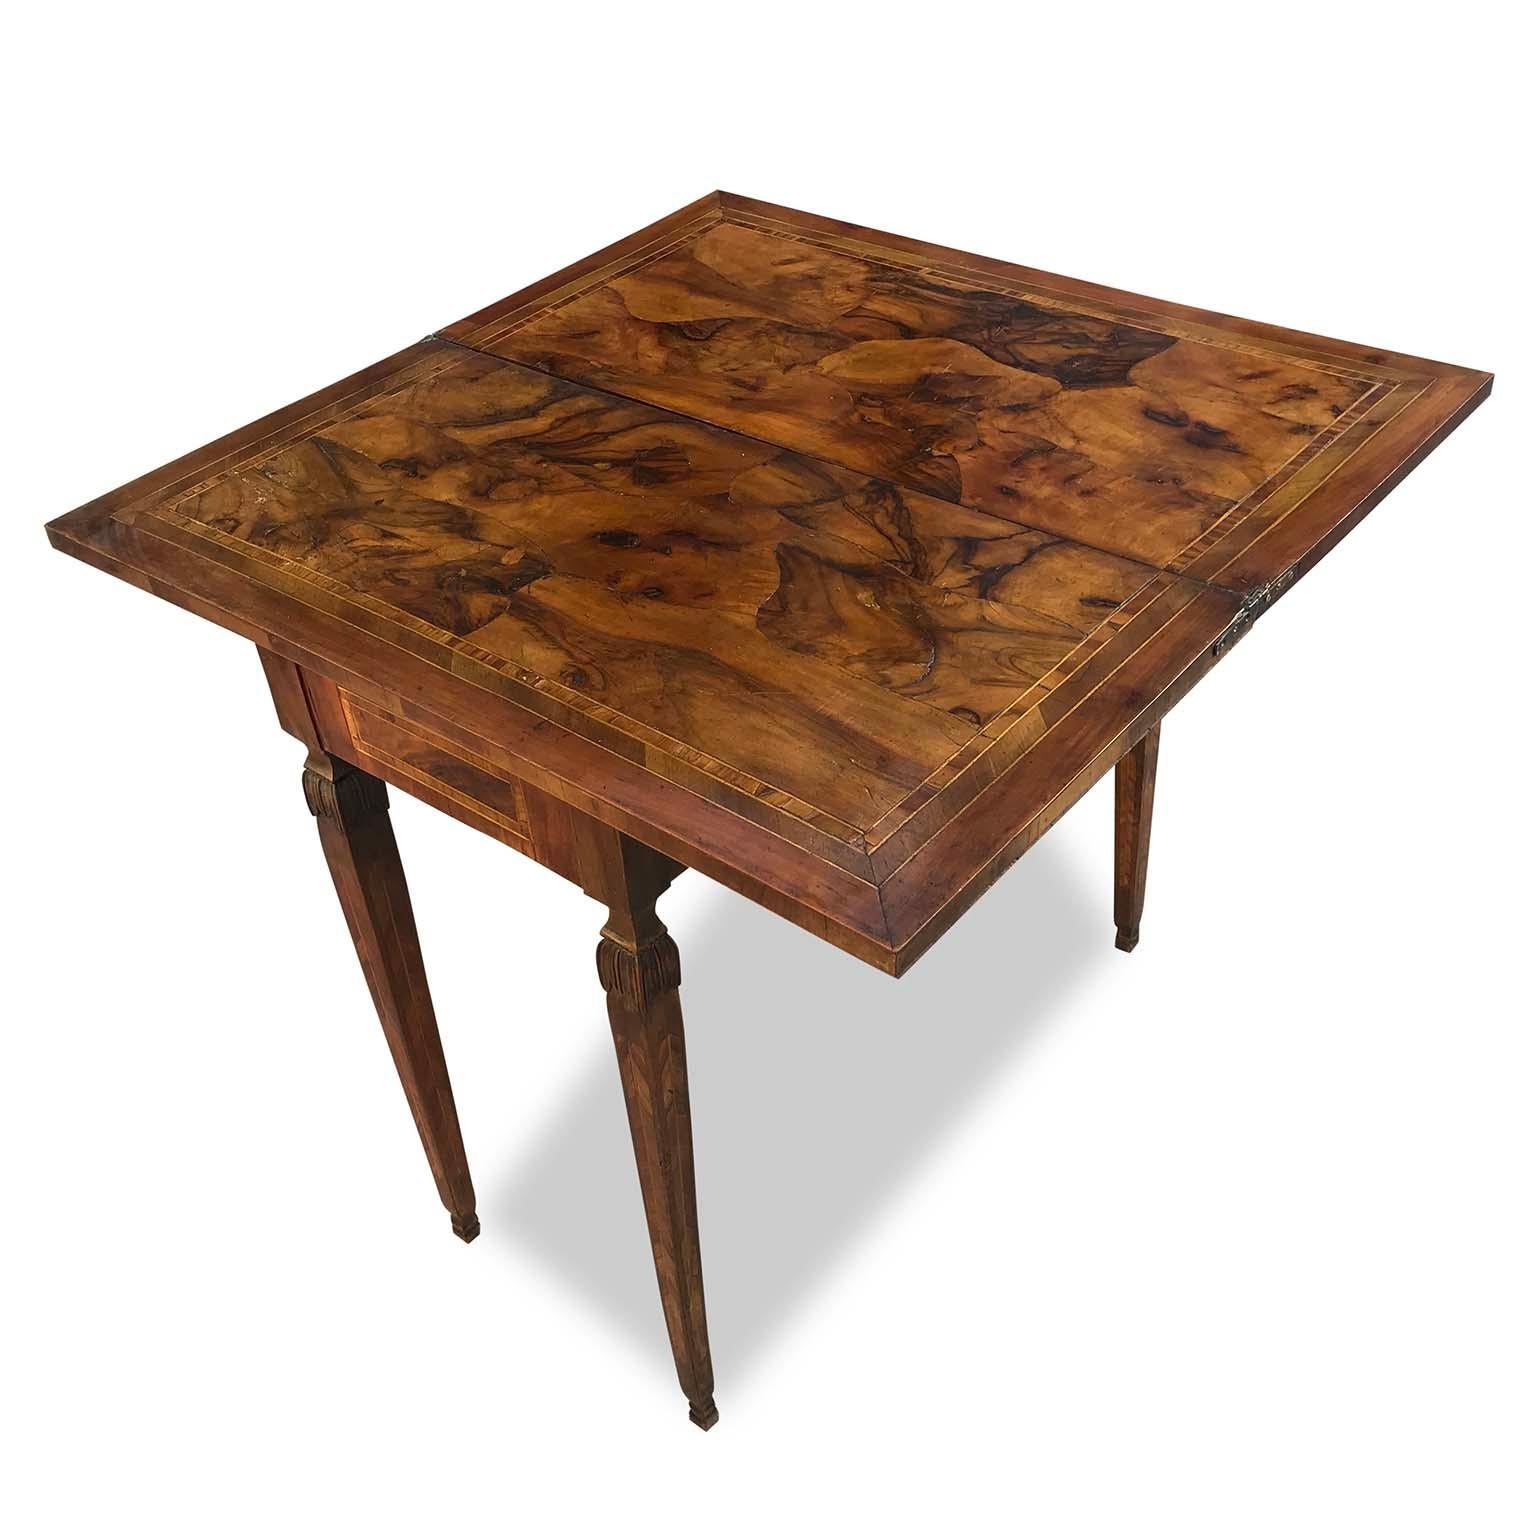 Very elegant extendable, one leaf, tea table, a fold over extremely versatile table, can be used as game or console table, dating back to early 19th century. 
The table is burl veneered, a very good quality piece of furniture at the time. The top